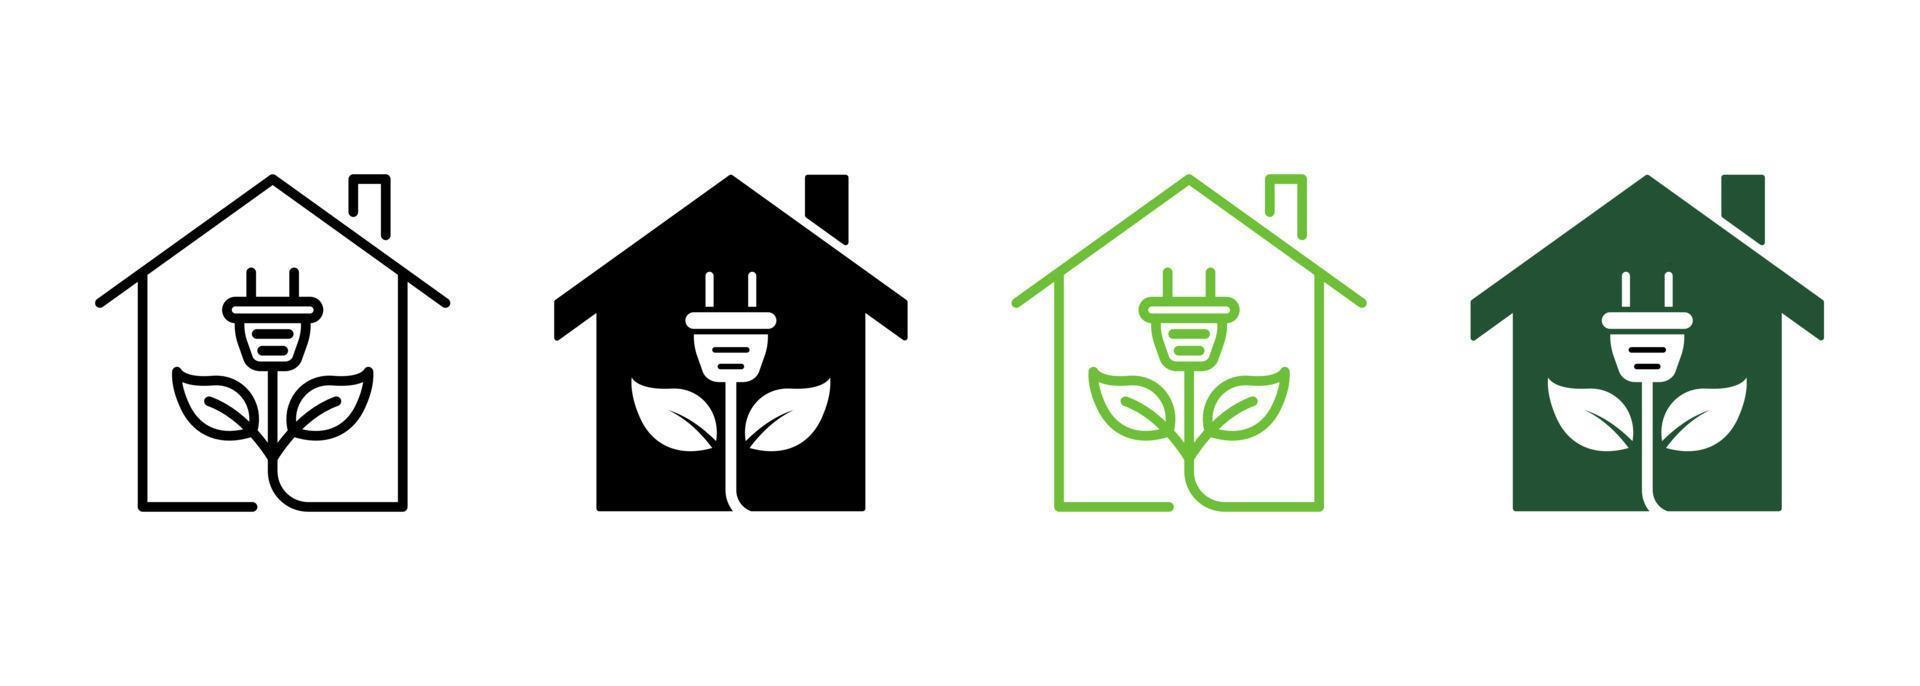 Eco House with Leaf and Plug Line and Silhouette Icon Color Set. Natural Home with Green Energy Pictogram. Ecology Real Estate Symbol Collection on White Background. Isolated Vector Illustration.